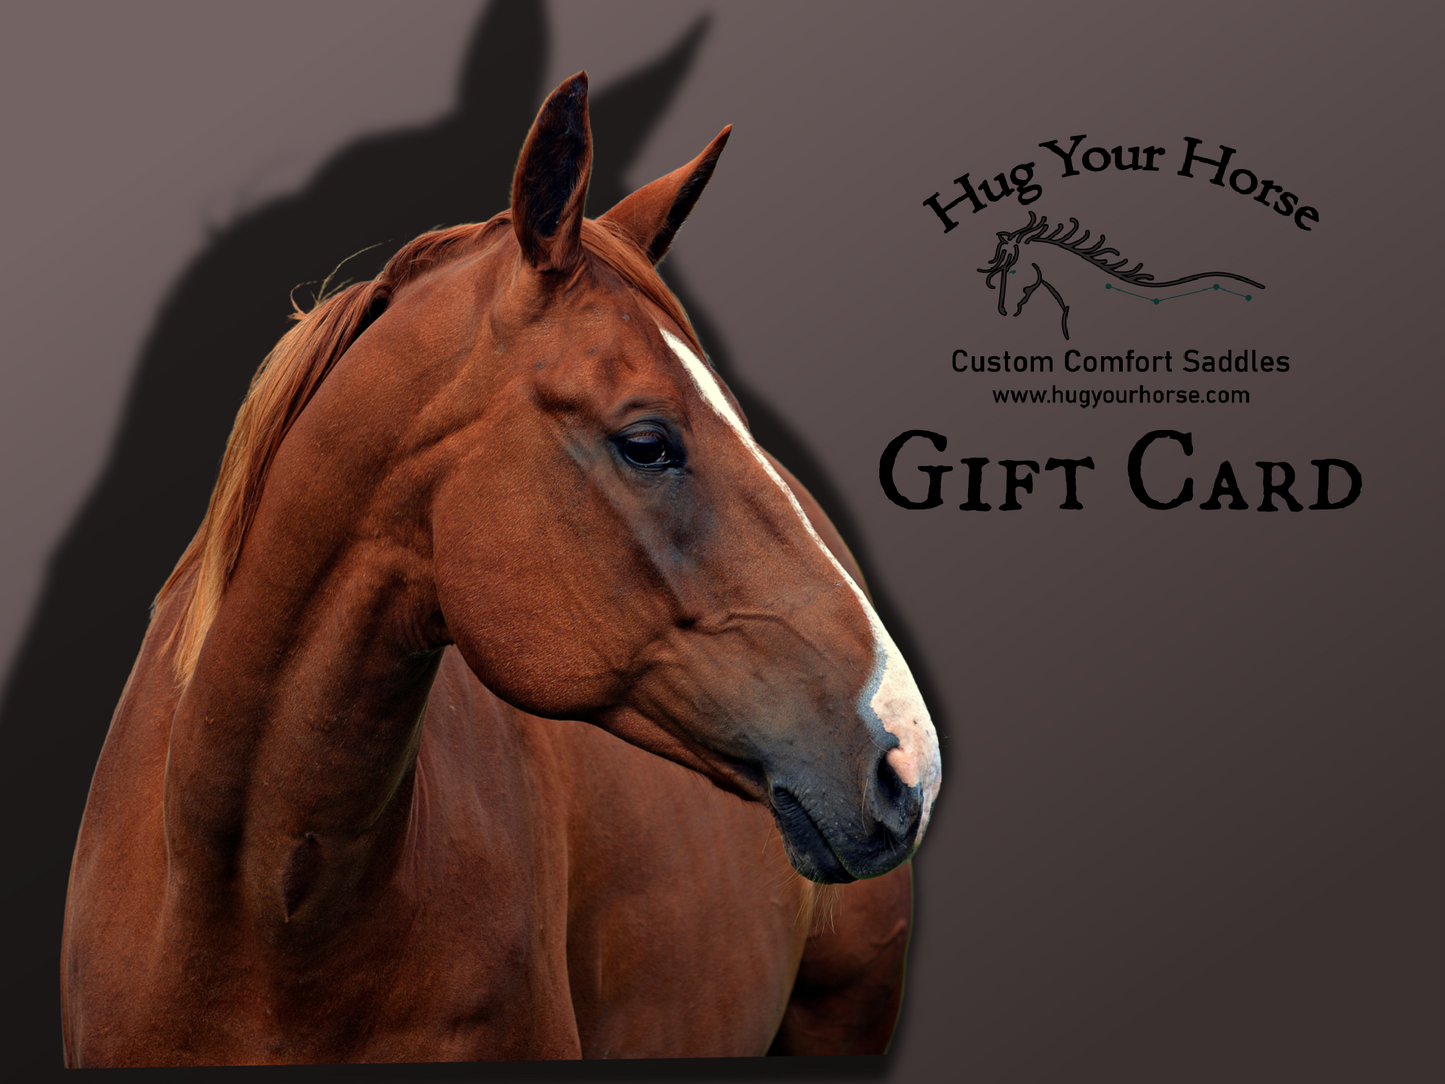 Hug Your Horse Gift Card